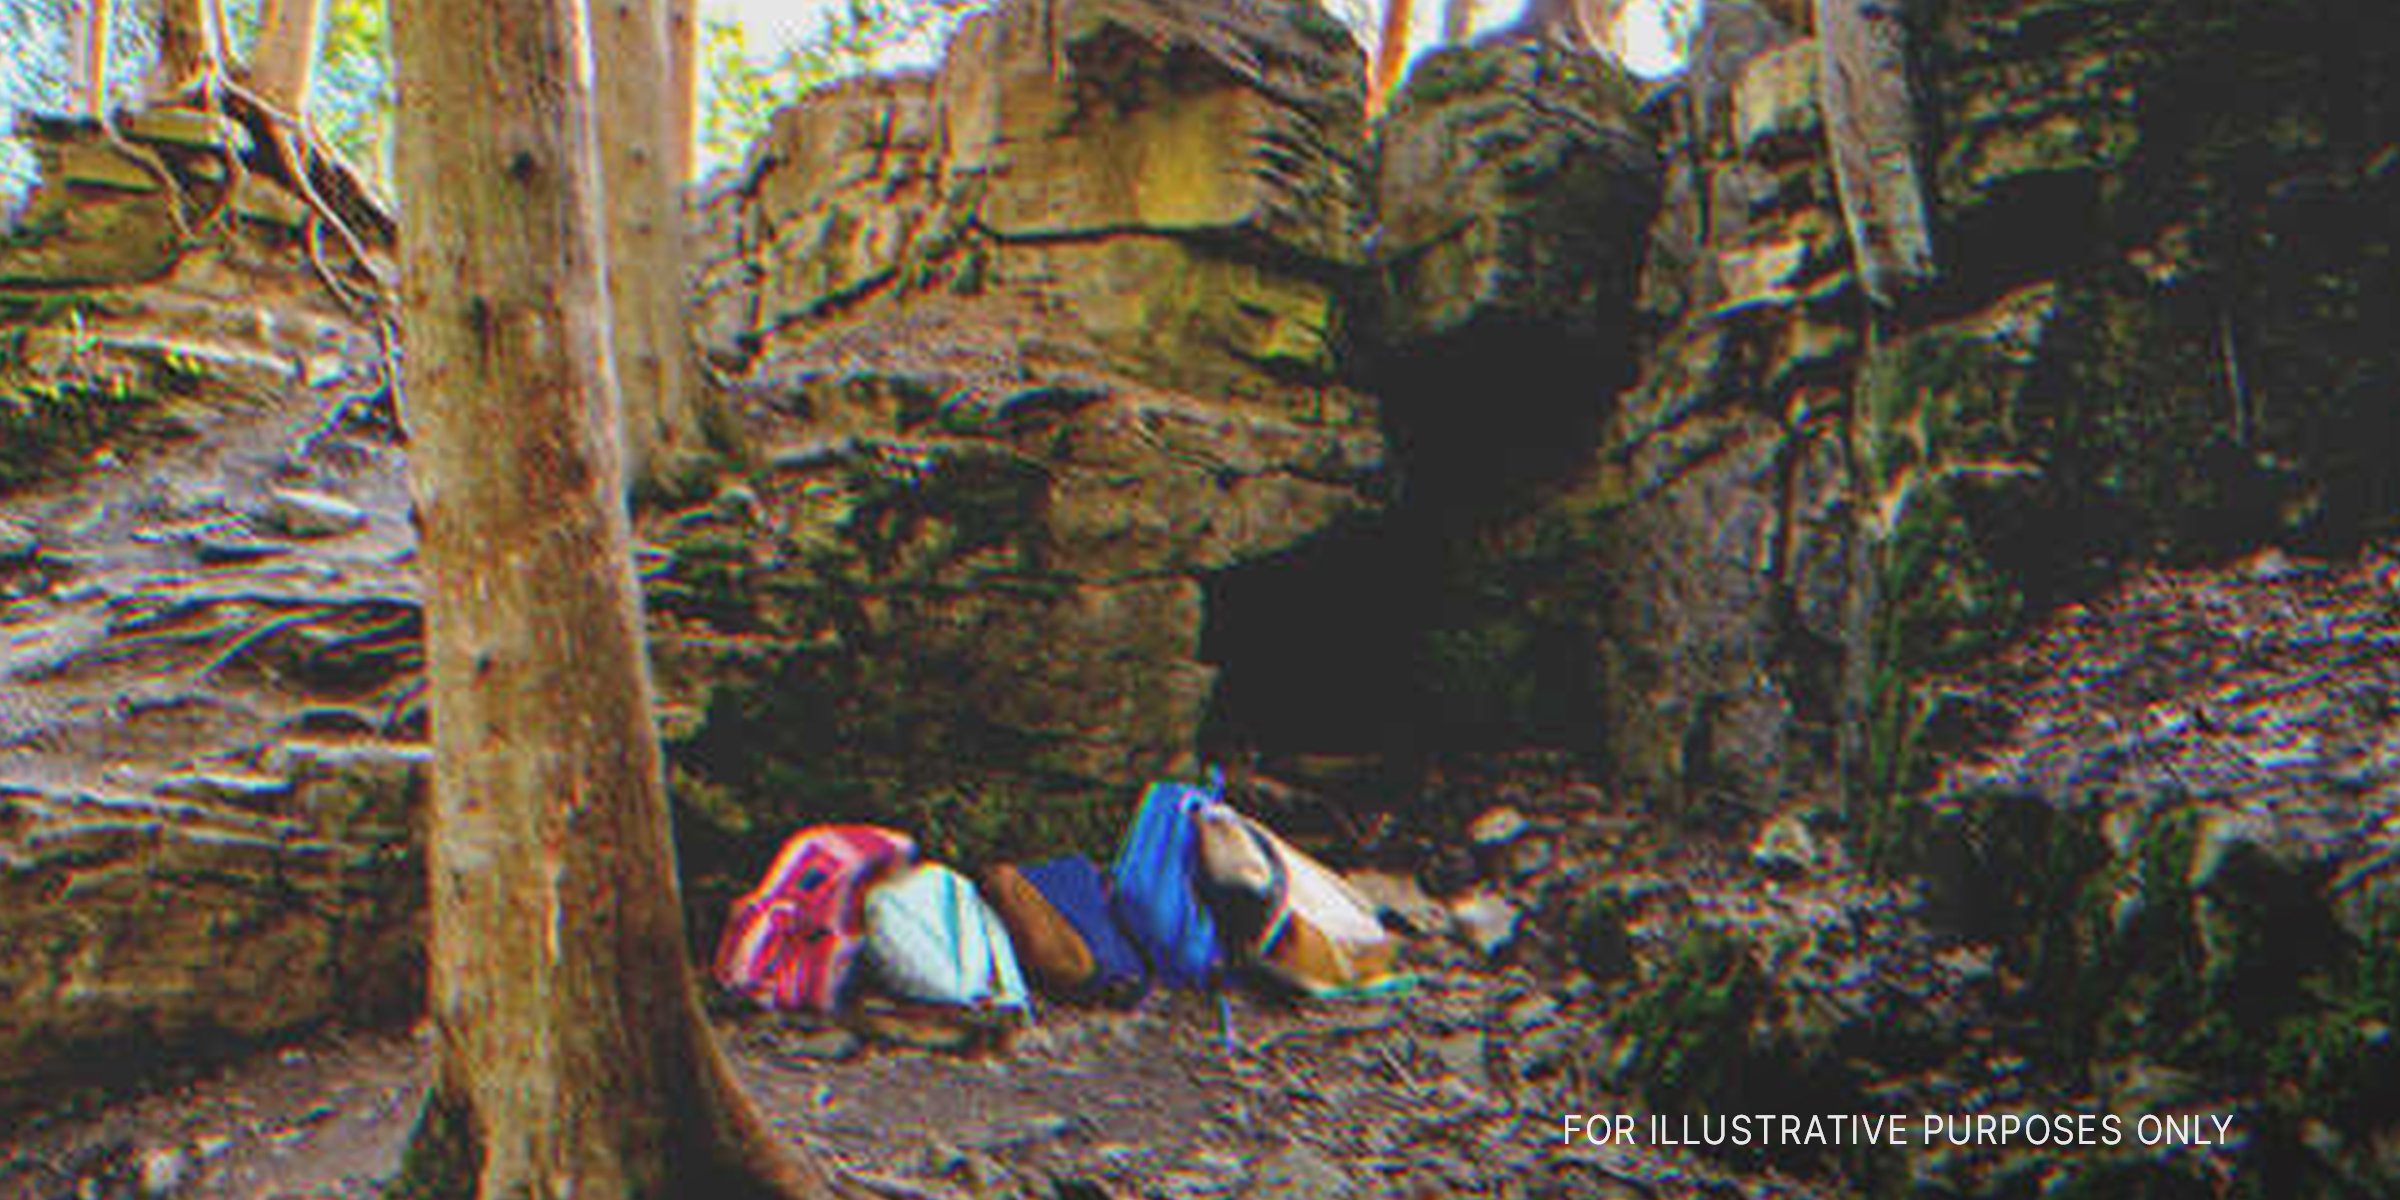 School bags near a cave | Source: Getty Images